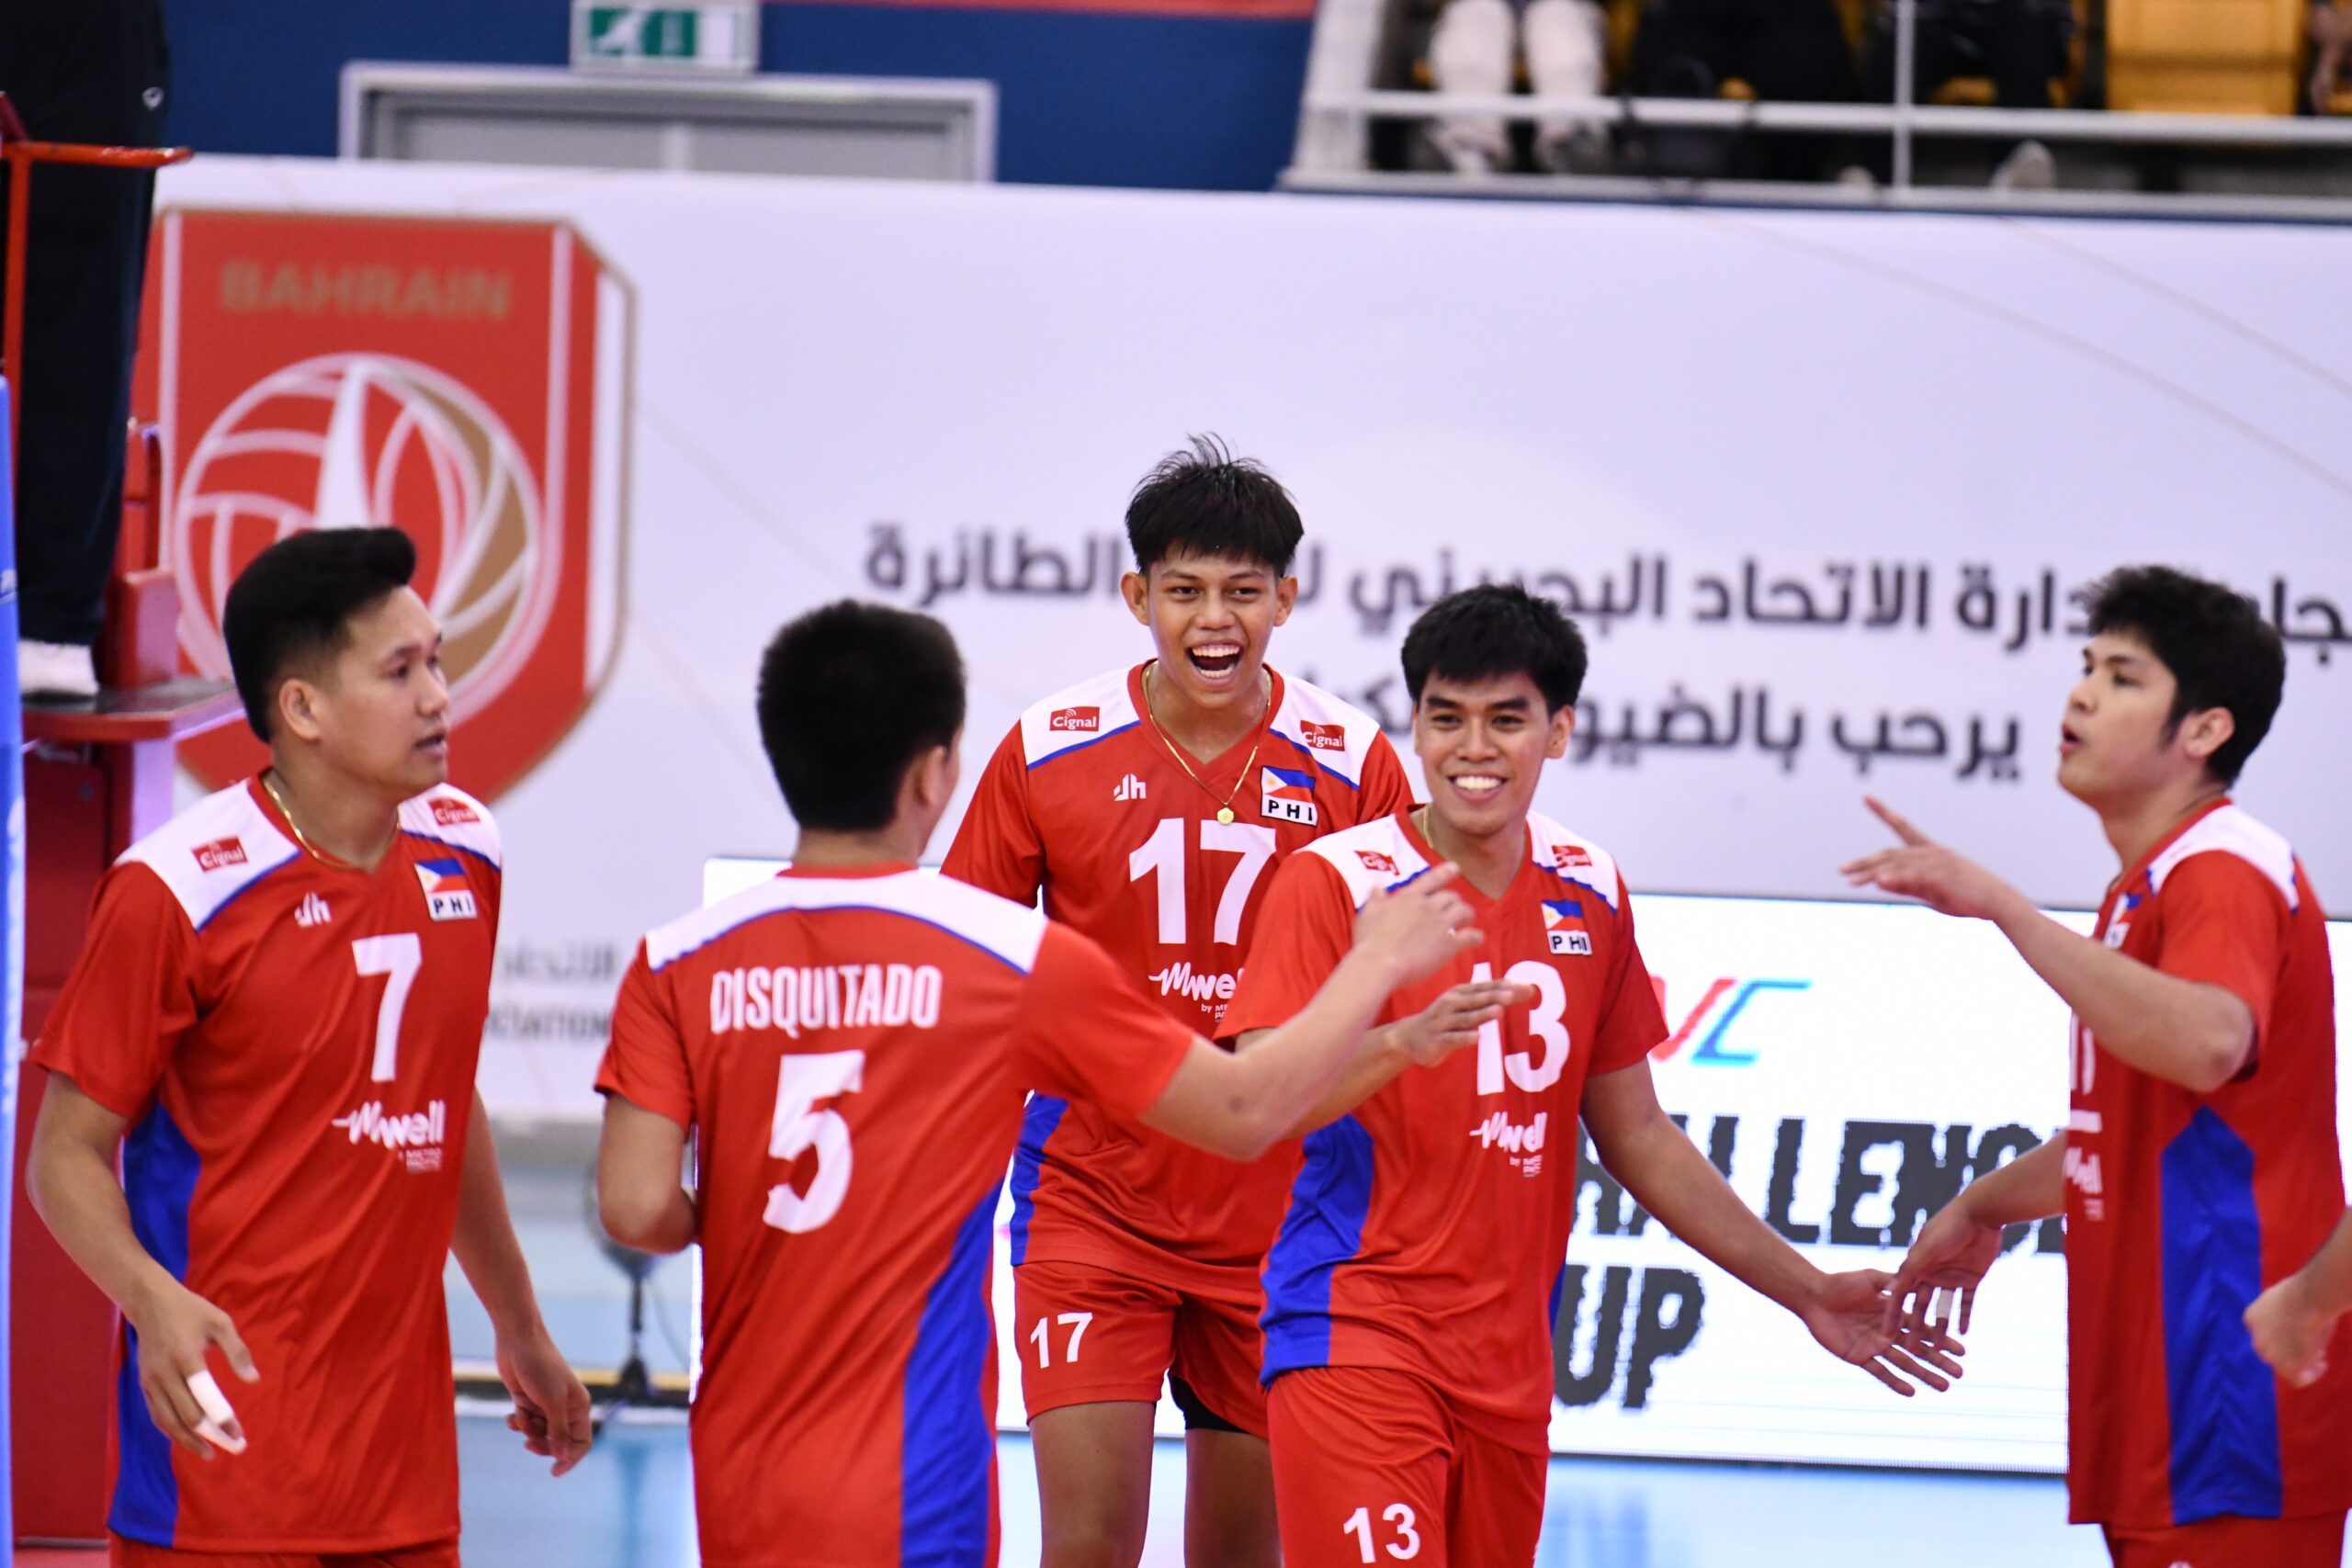 Alas Pilipinas men's team celebrates a point against Indonesia in the AVC Challenge Cup for Men 2024.